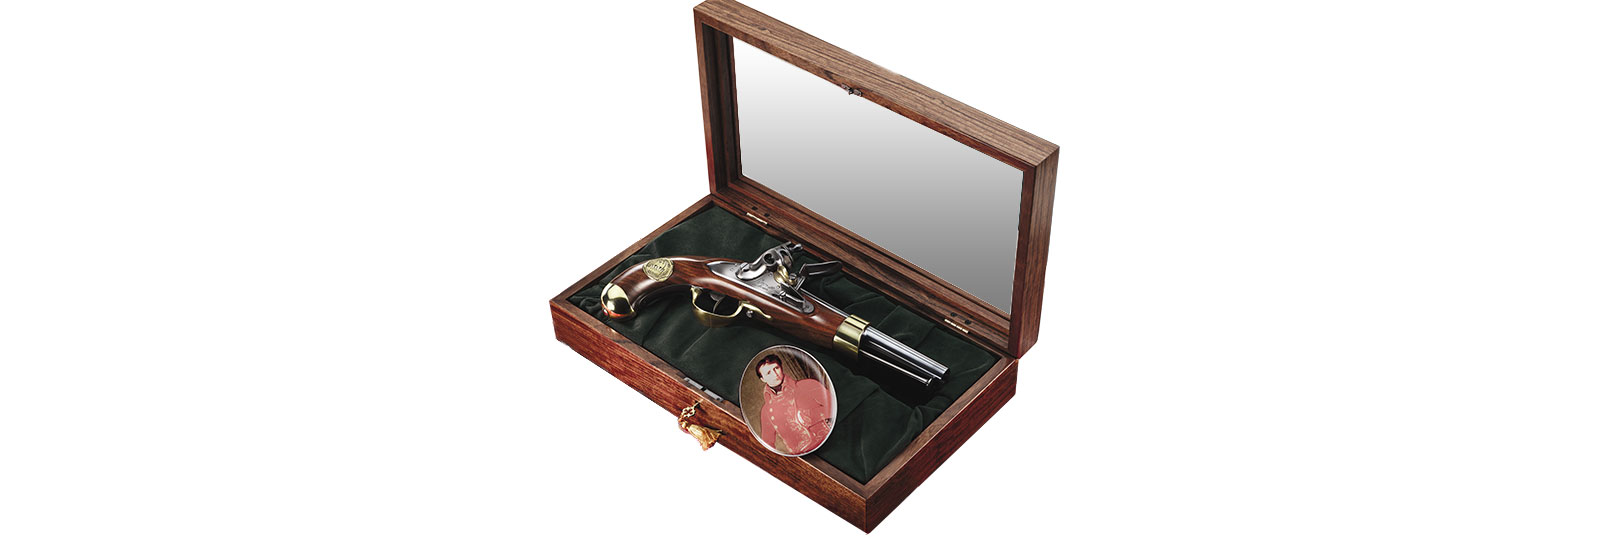 An XIII Commemorative Pistol with case